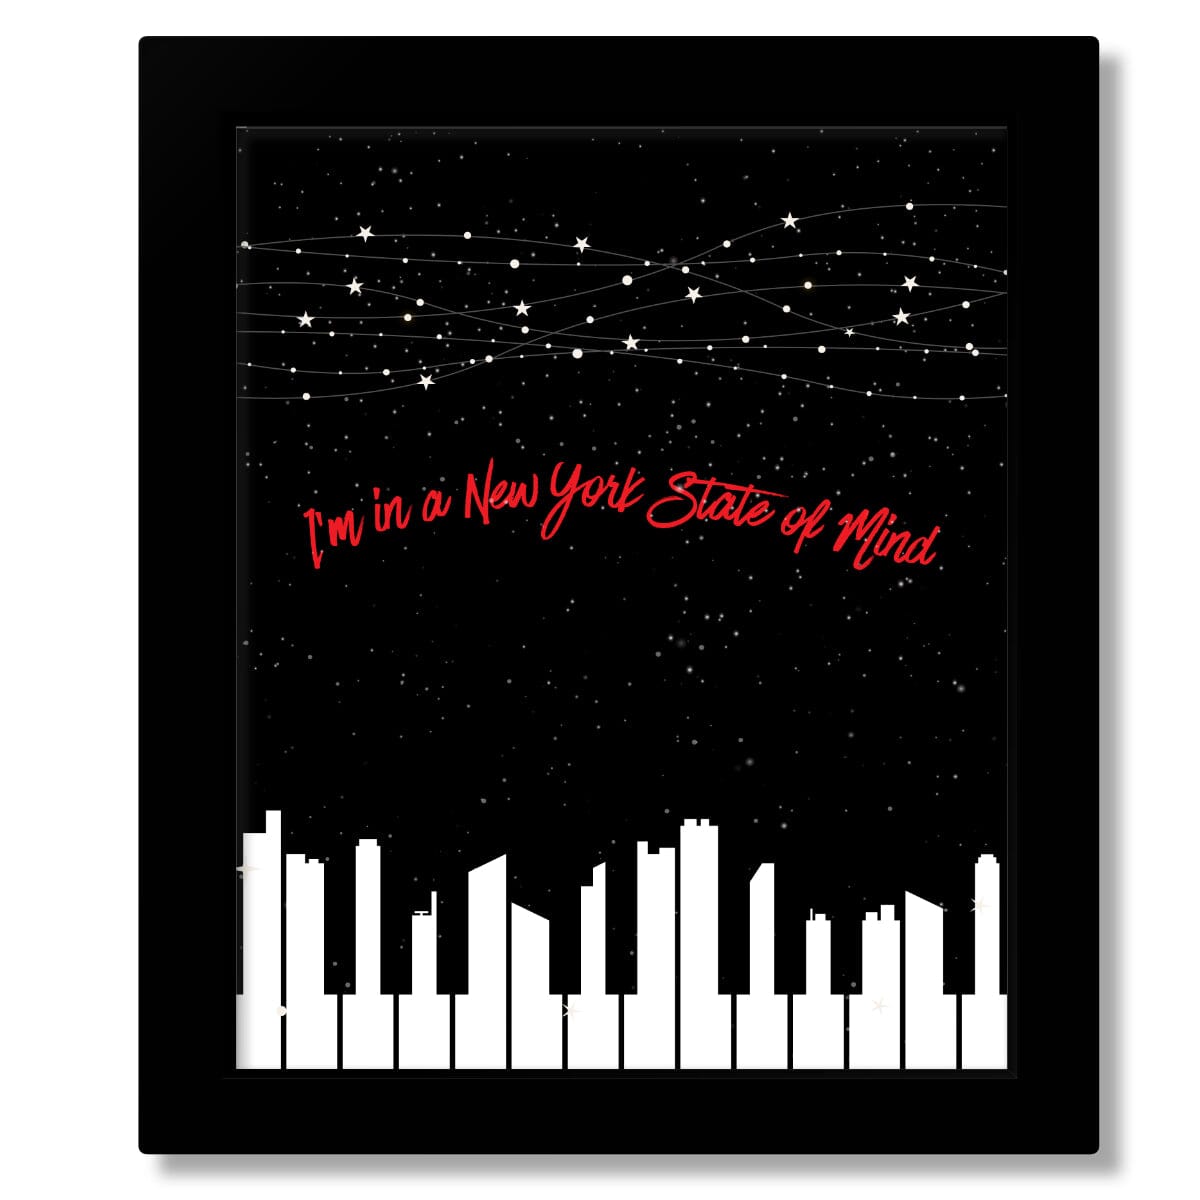 New York State of Mind by Billy Joel - Song Lyrics Art Print Song Lyrics Art Song Lyrics Art 8x10 Framed Print (without mat) 